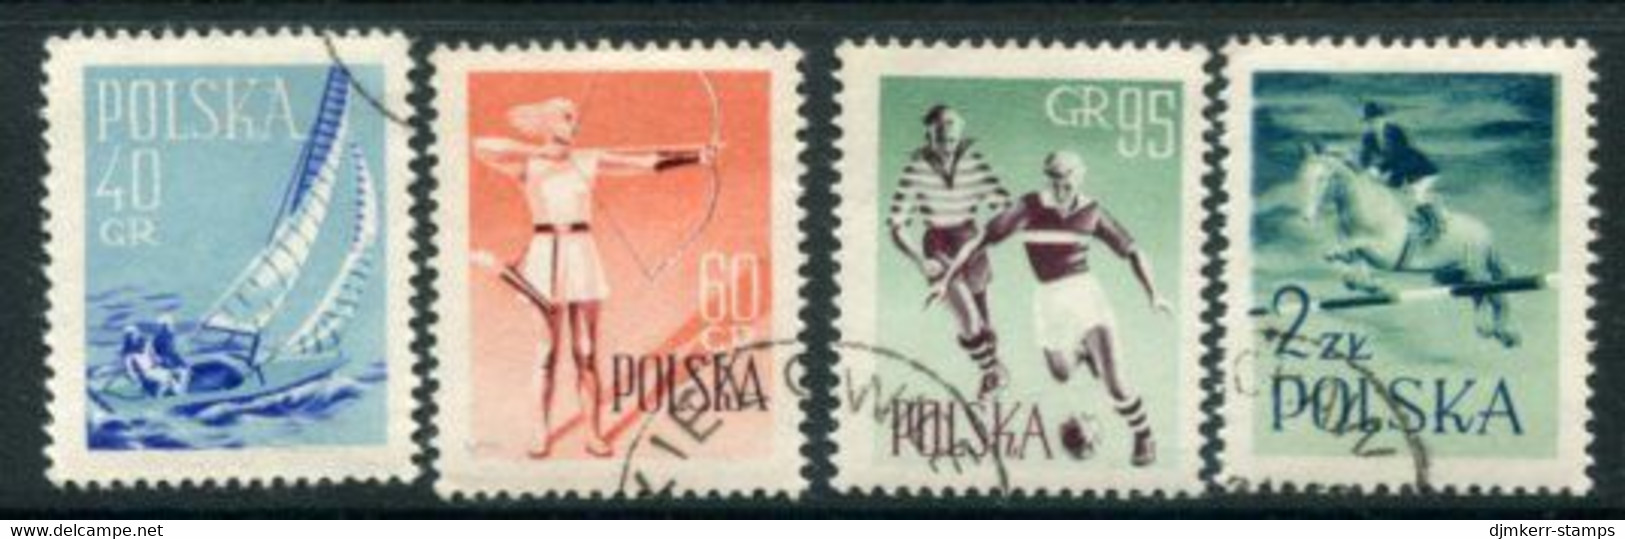 POLAND 1959 Sports, Used.  Michel 1083-89 - Used Stamps